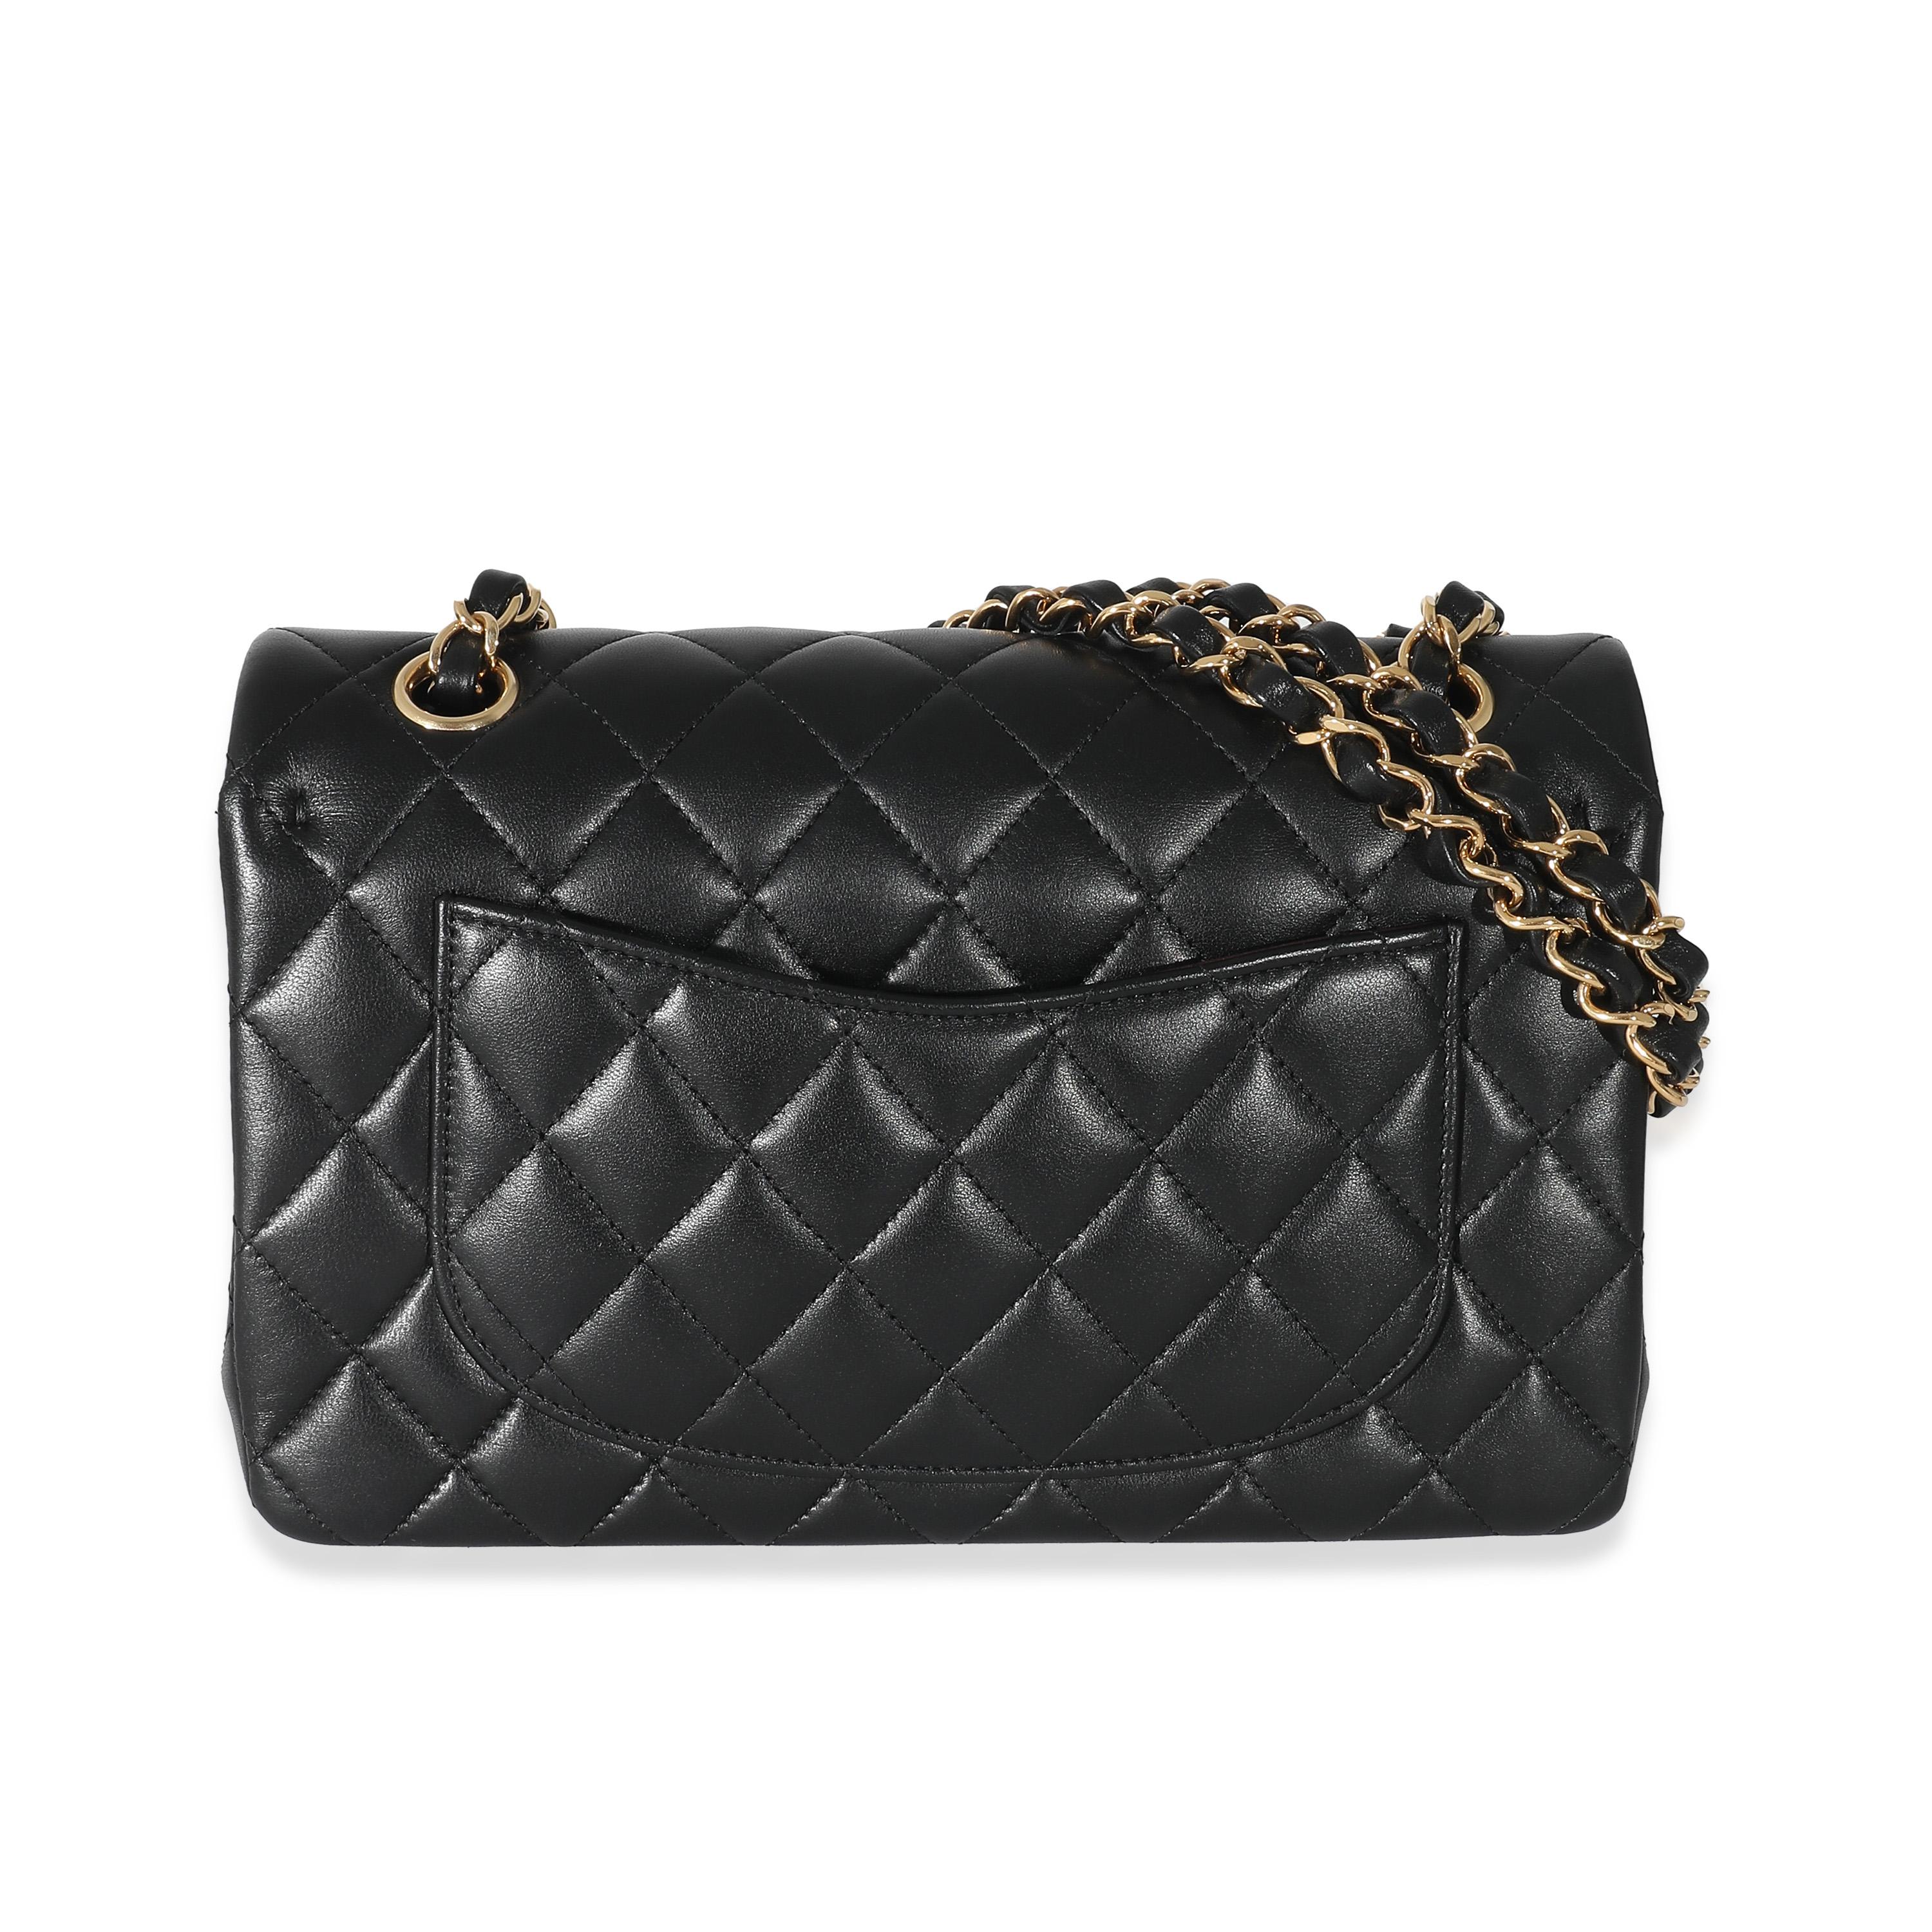 Listing Title: Chanel Black Quilted Lambskin Small Classic Double Flap Bag
SKU: 134175
MSRP: 9600.00 USD
Condition: Pre-owned 
Condition Description: A timeless classic that never goes out of style, the flap bag from Chanel dates back to 1955 and